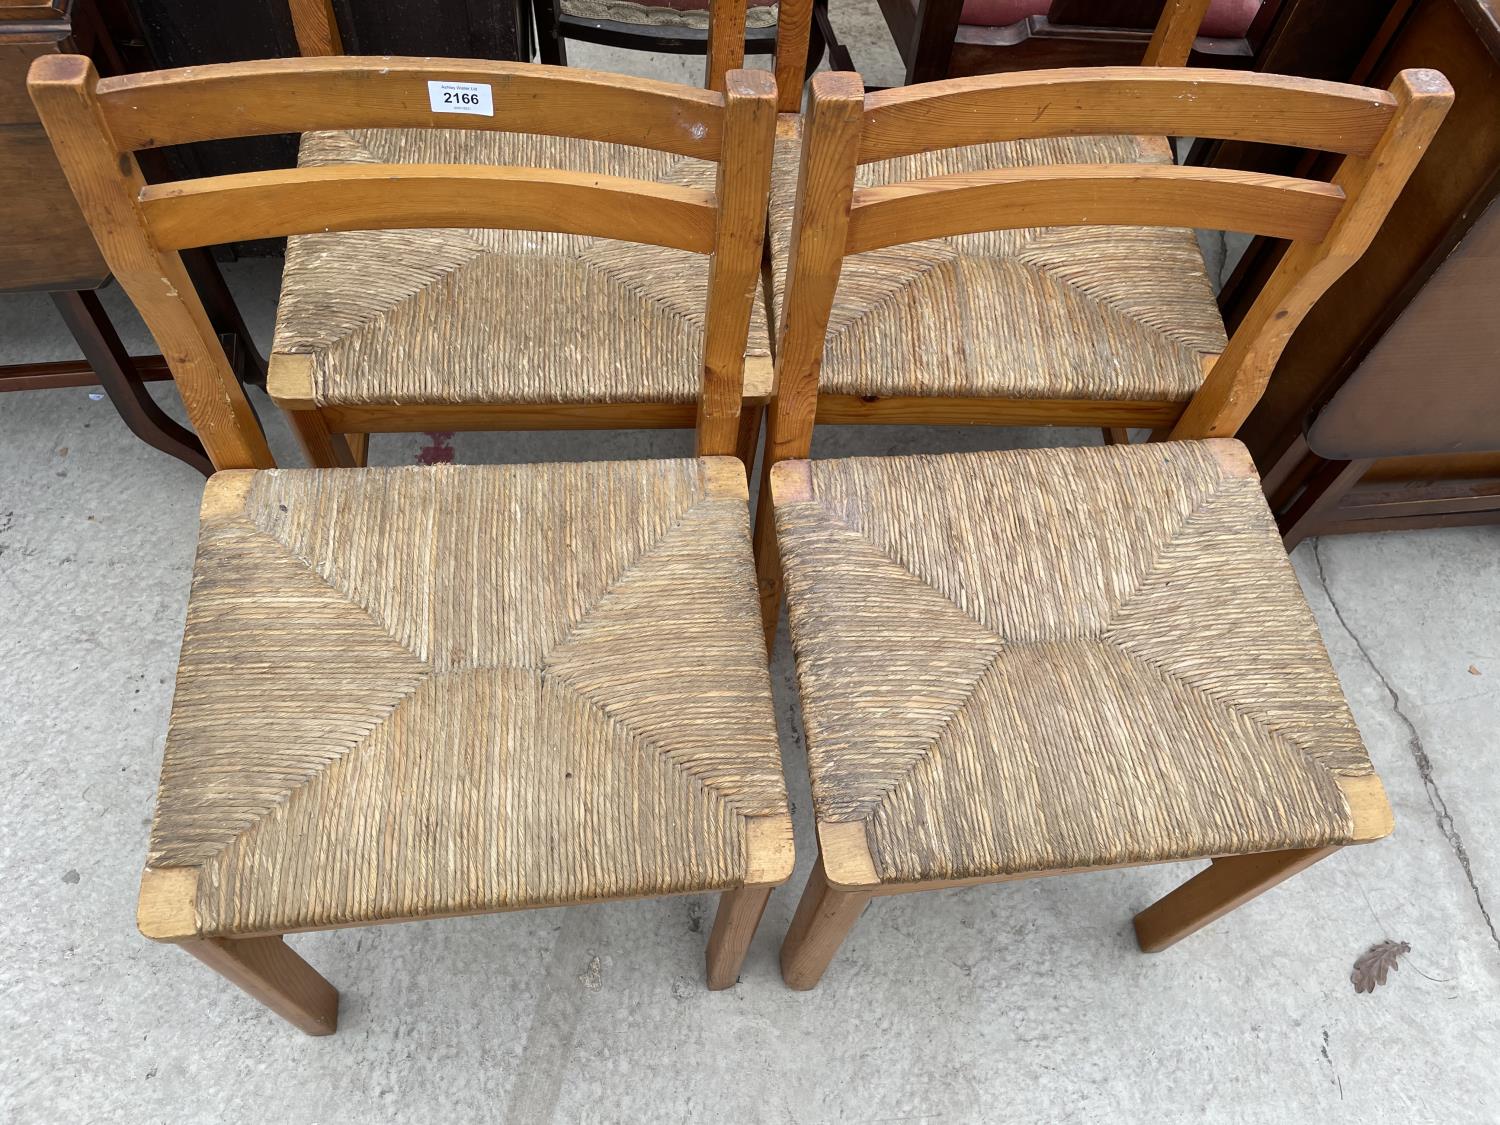 FOUR PINE DINING CHAIRS WITH RUSH SEATS - Image 2 of 4